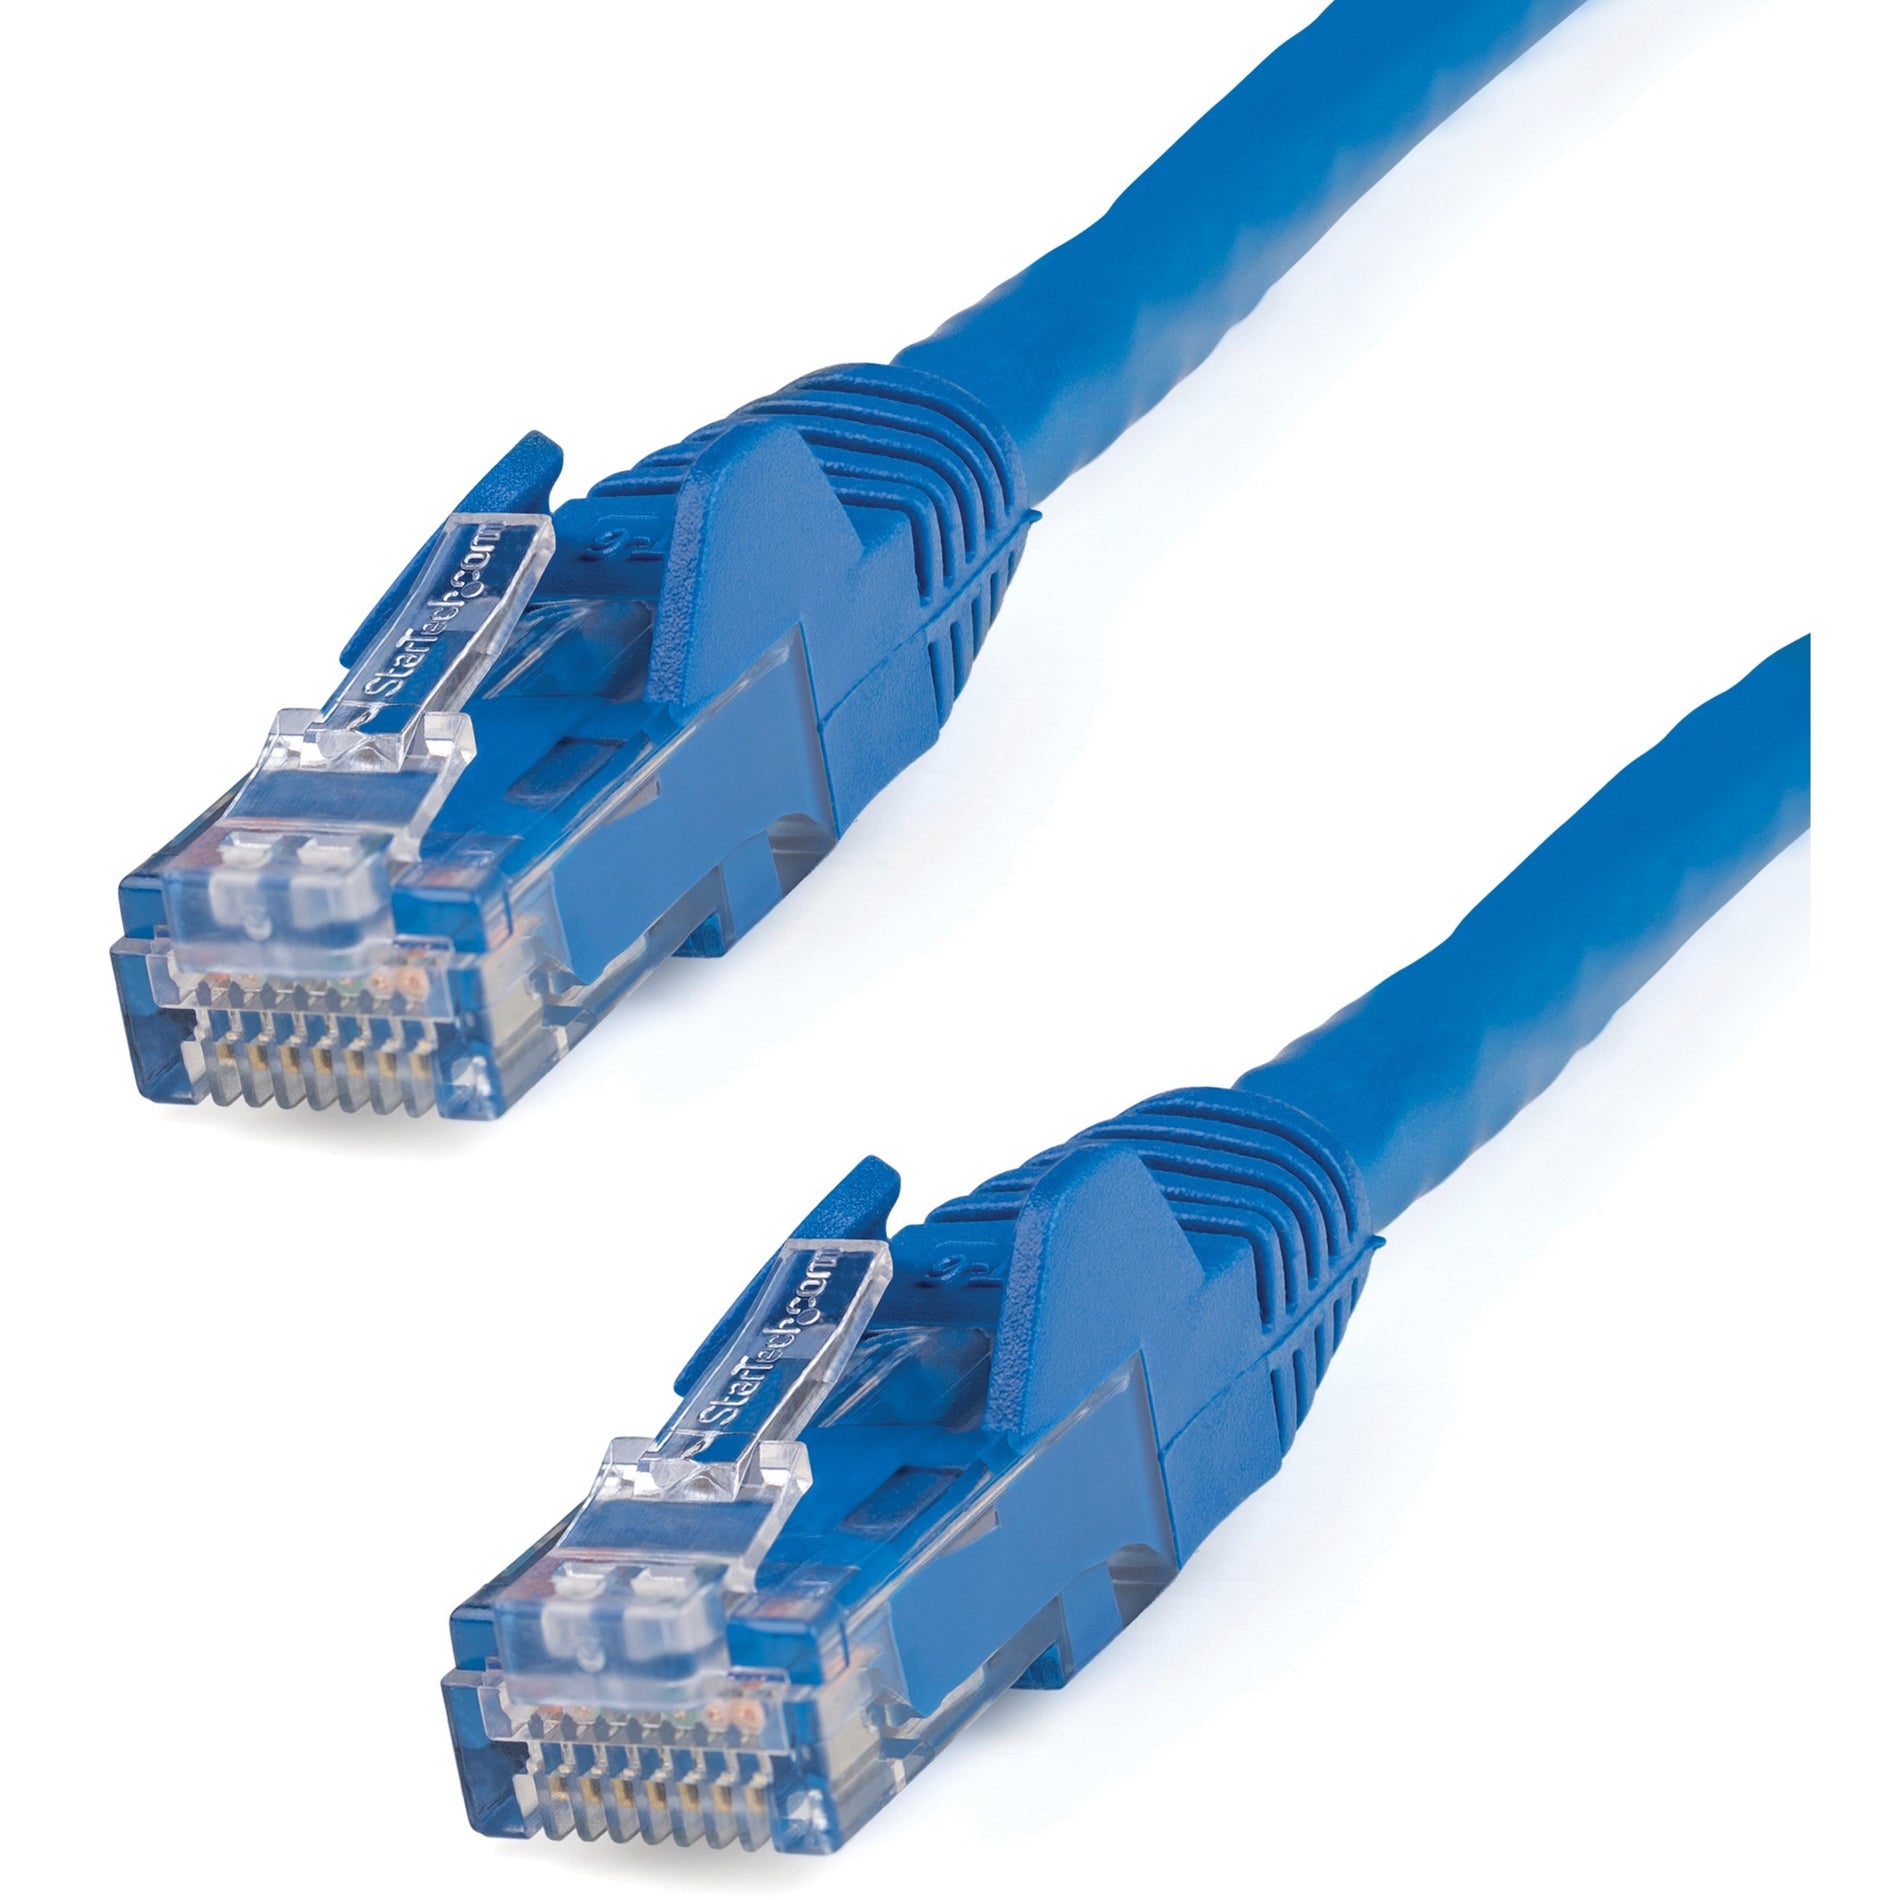 StarTech.com N6PATCH1BL Cat6 Patch Cable, 1 ft, 10 Gbit/s Data Transfer Rate, Blue